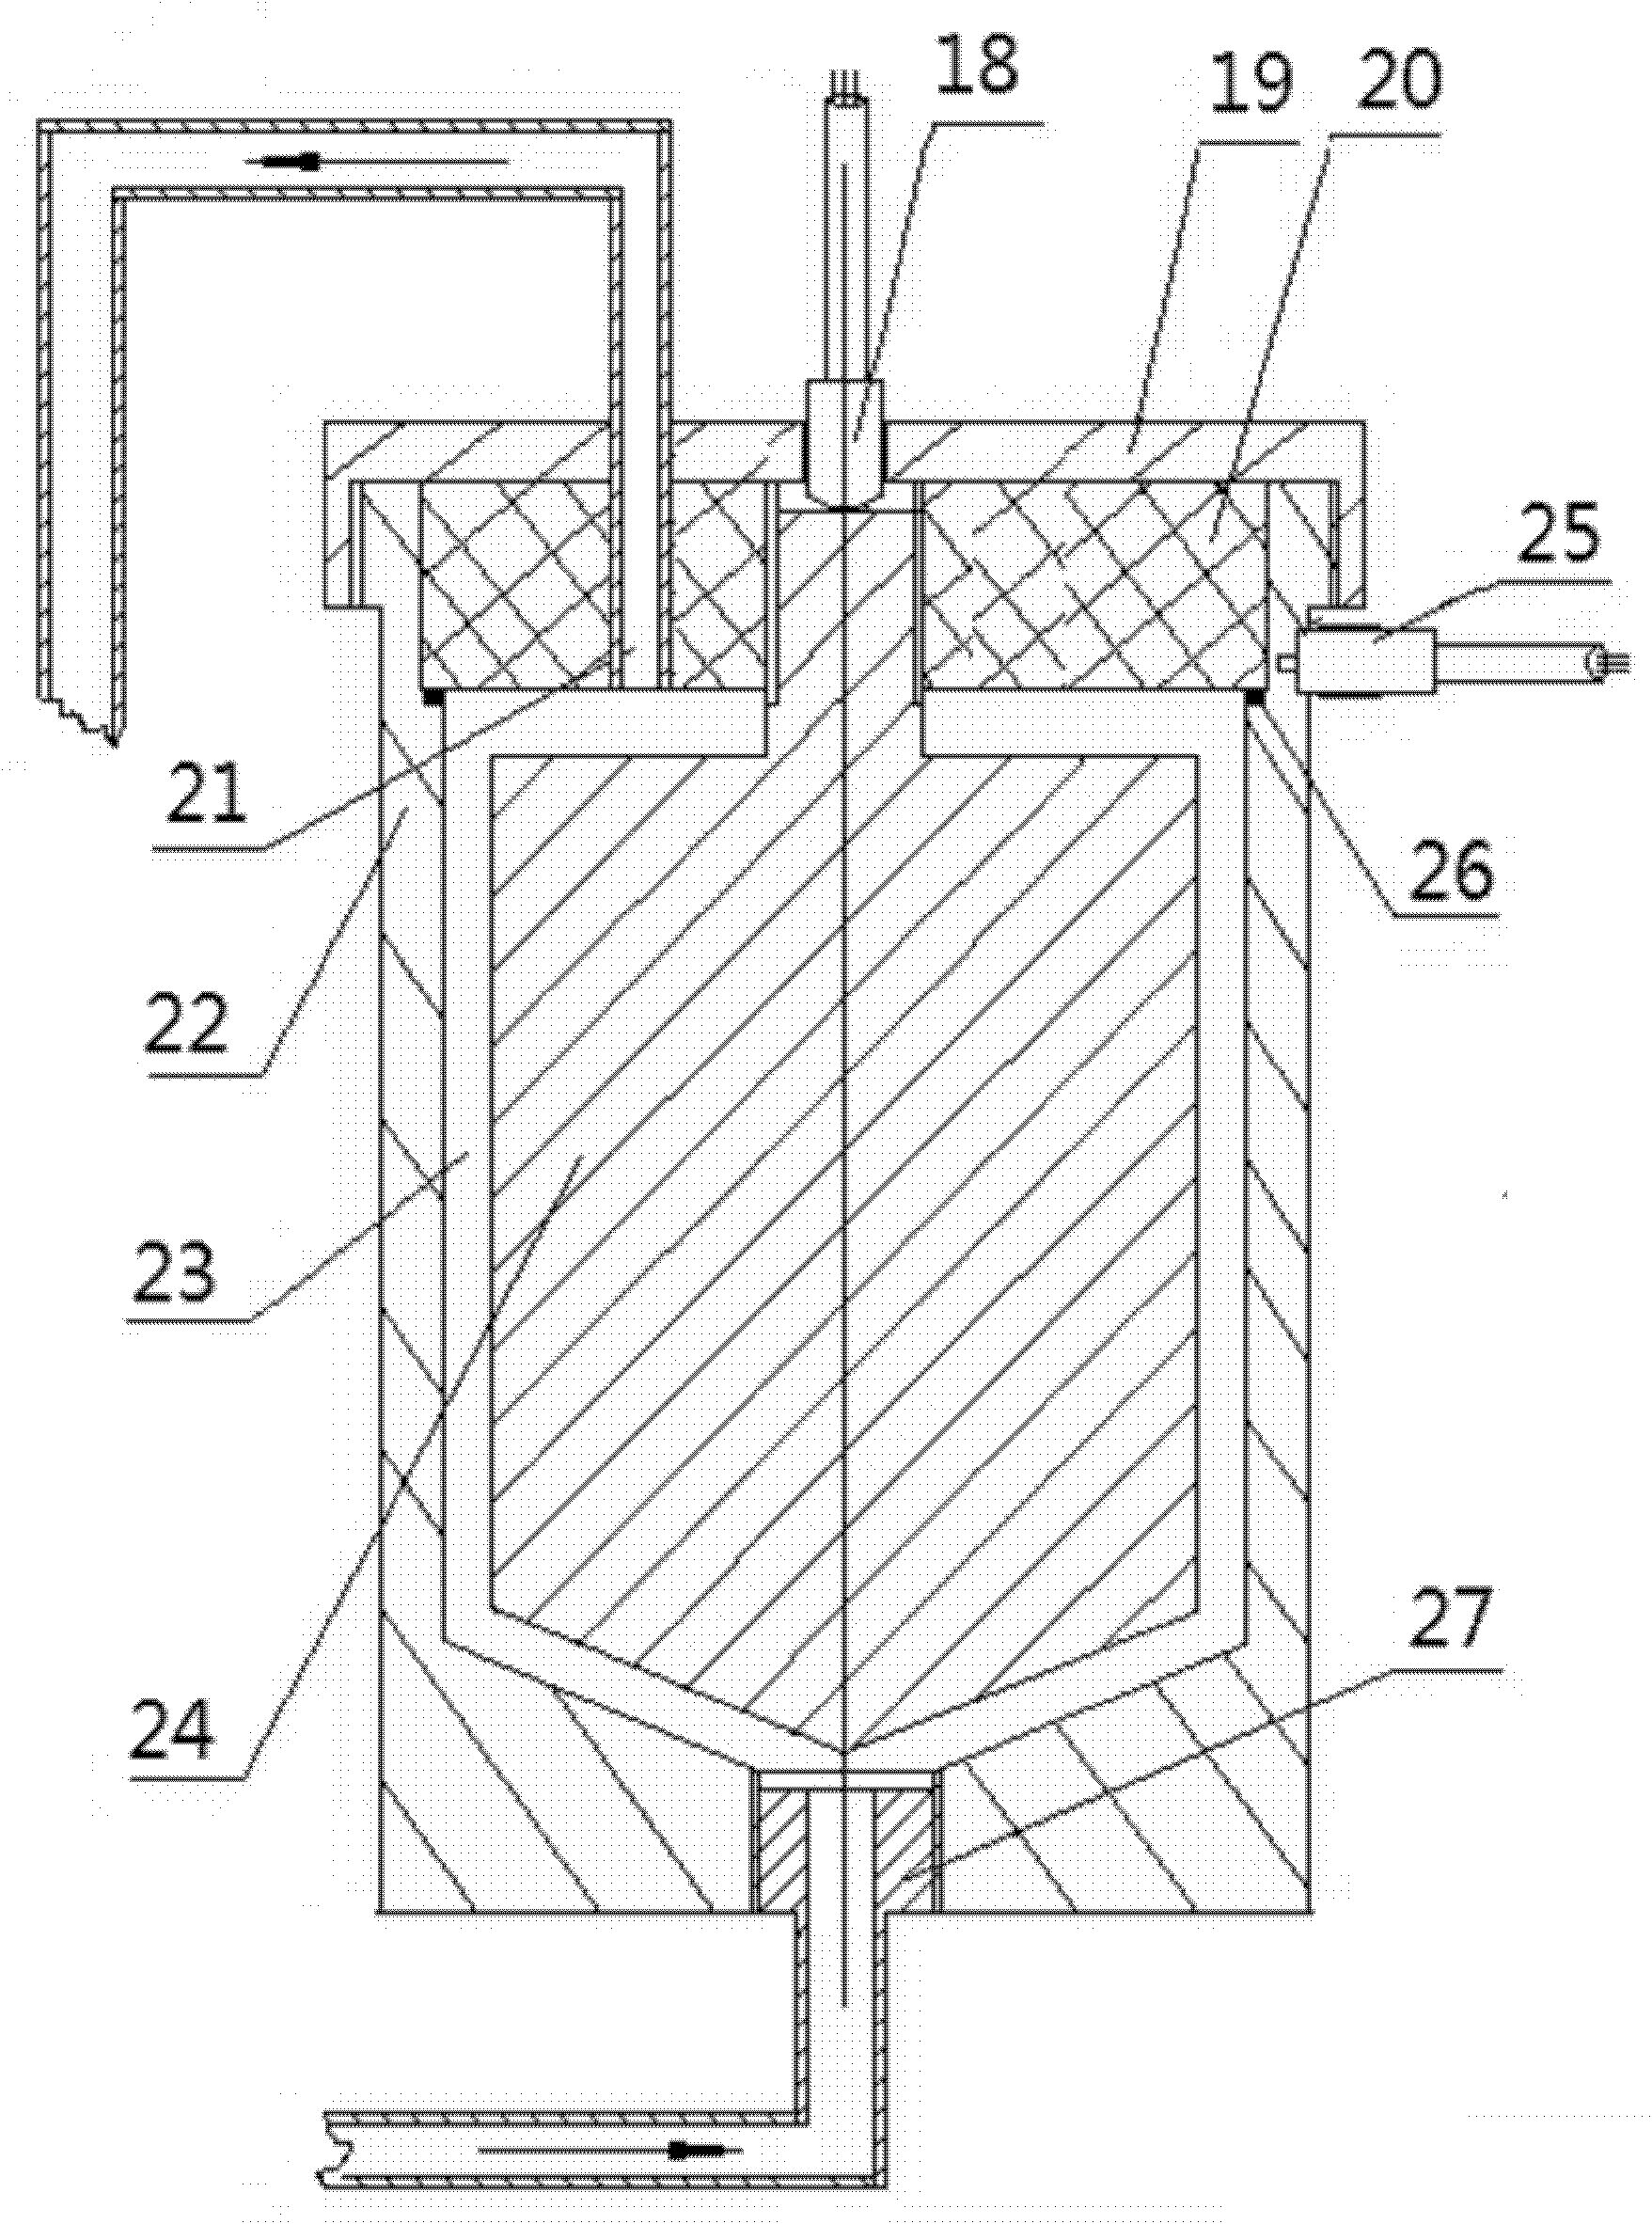 Test method for evaluating oxidation stability of transformer oil under high-voltage alternating current or direct current field